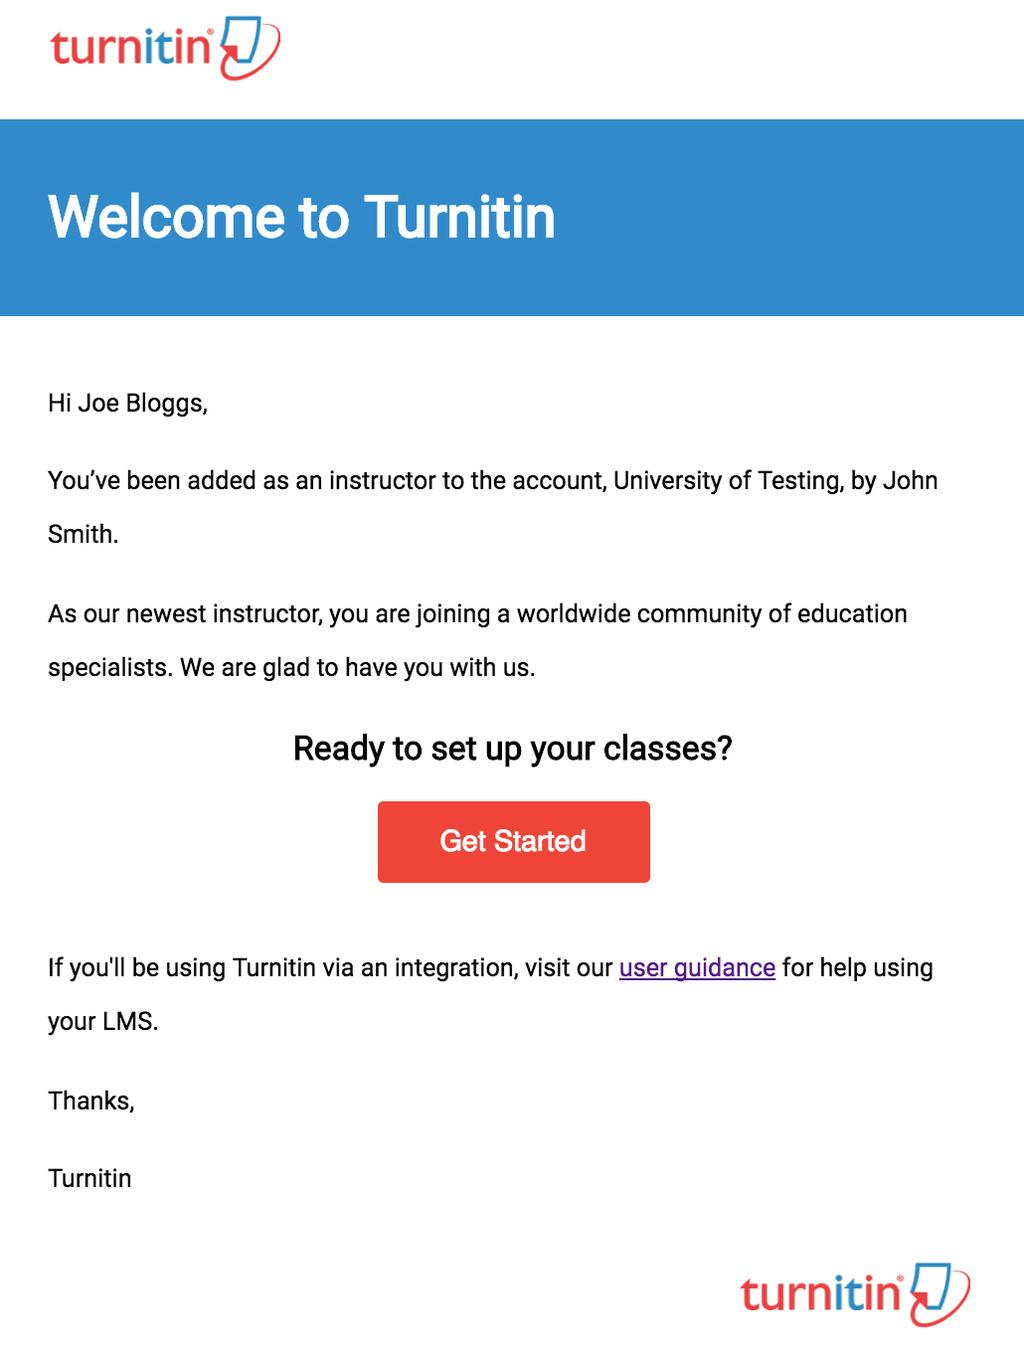 2. You will be directed to a quick 4-step introduction to Turnitin, with useful guidance to familiarize you with class and assignment creation, as well as adding your